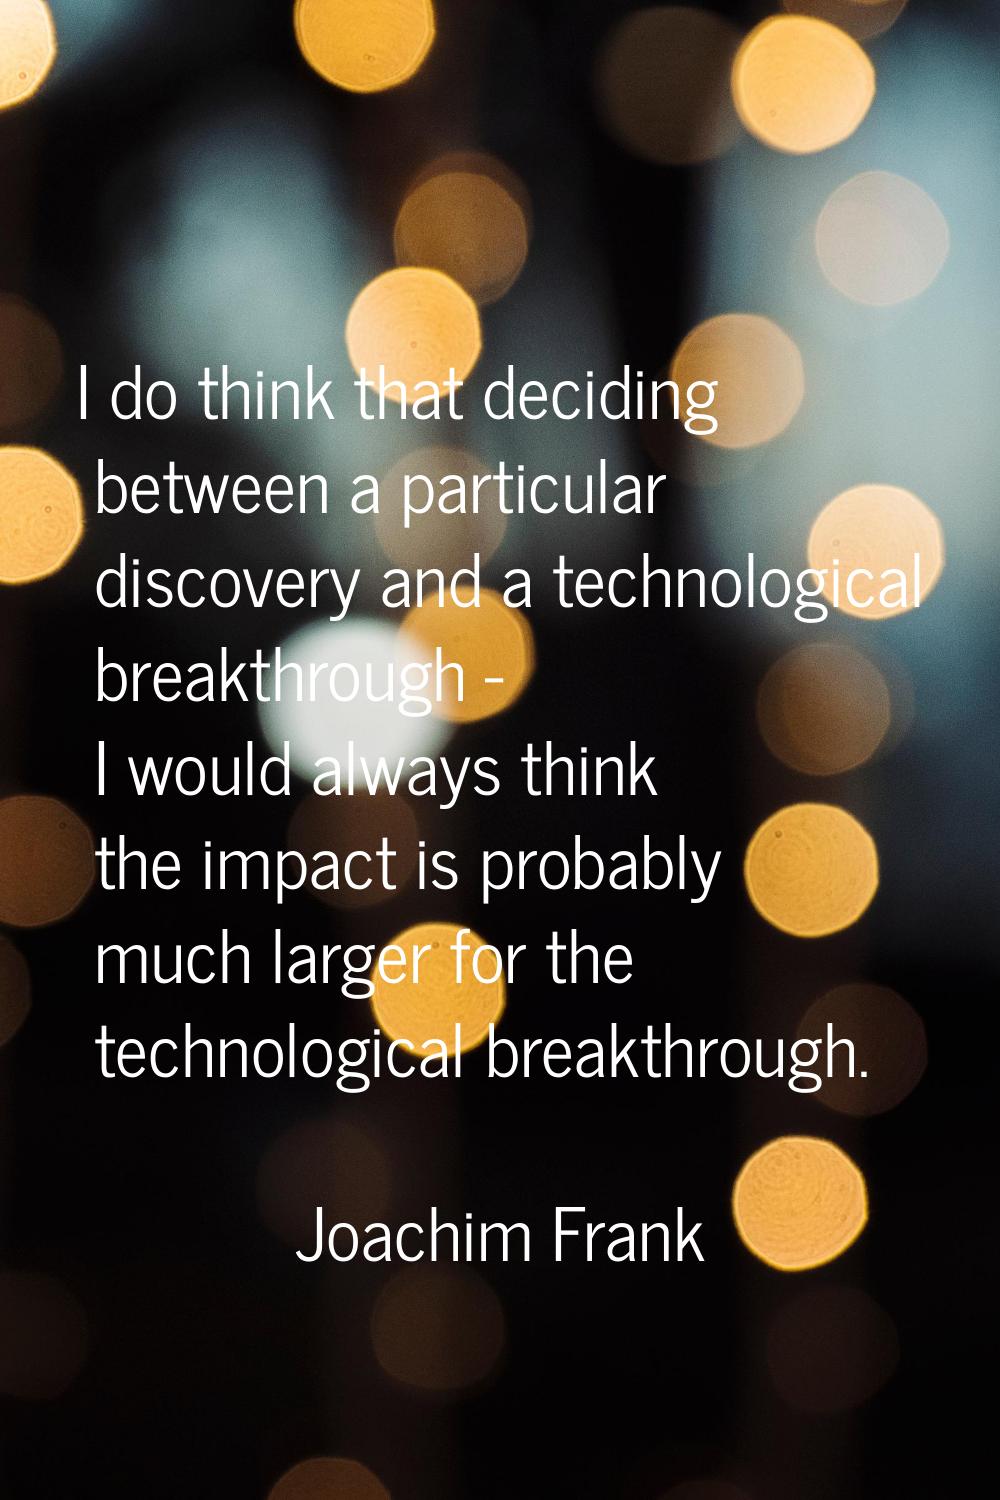 I do think that deciding between a particular discovery and a technological breakthrough - I would 